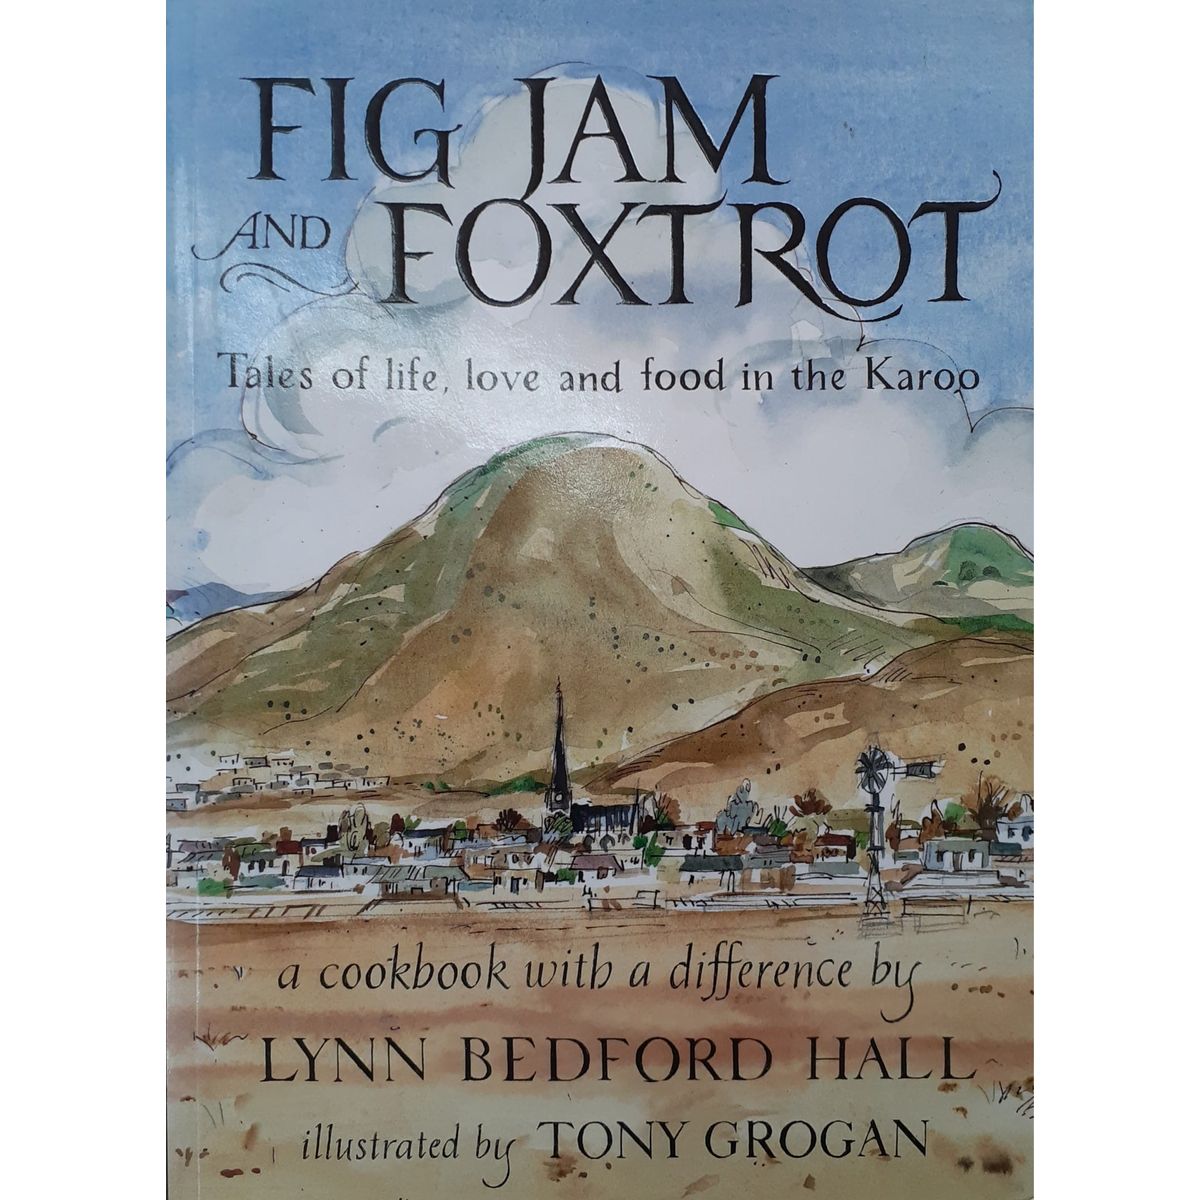 ISBN: 9781868728688 / 1868728684 - Fig Jam and Foxtrot: Tales of Life, Love and Food in the Karoo by Lynn Bedford Hall [2003]